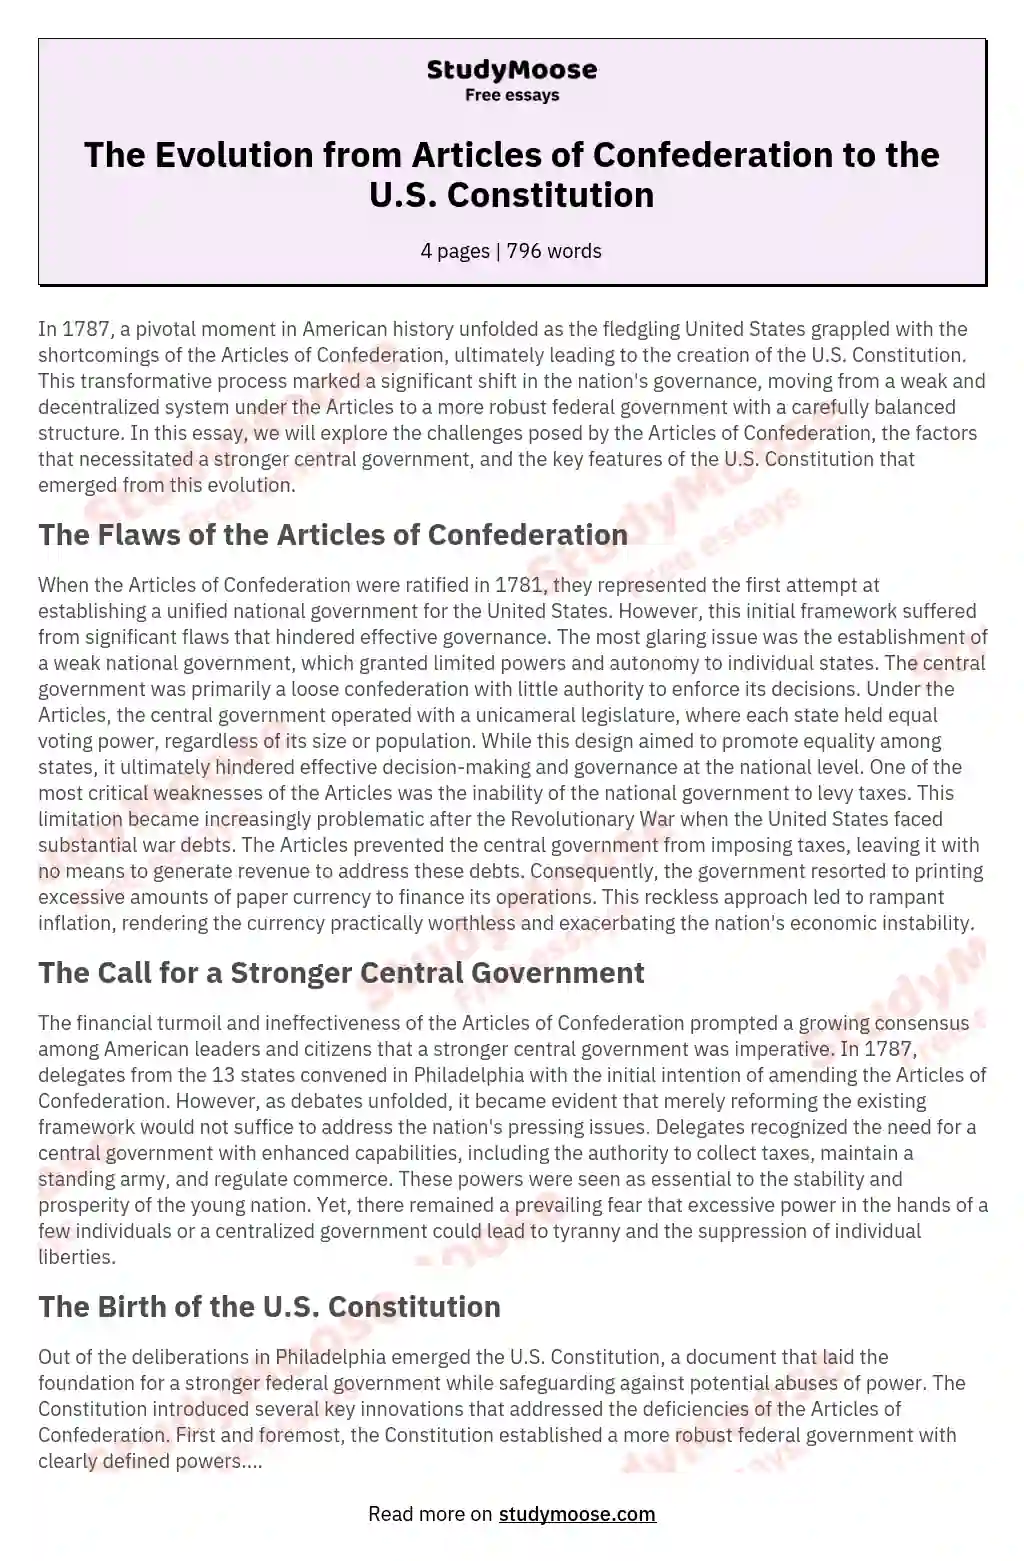 The Evolution from Articles of Confederation to the U.S. Constitution essay